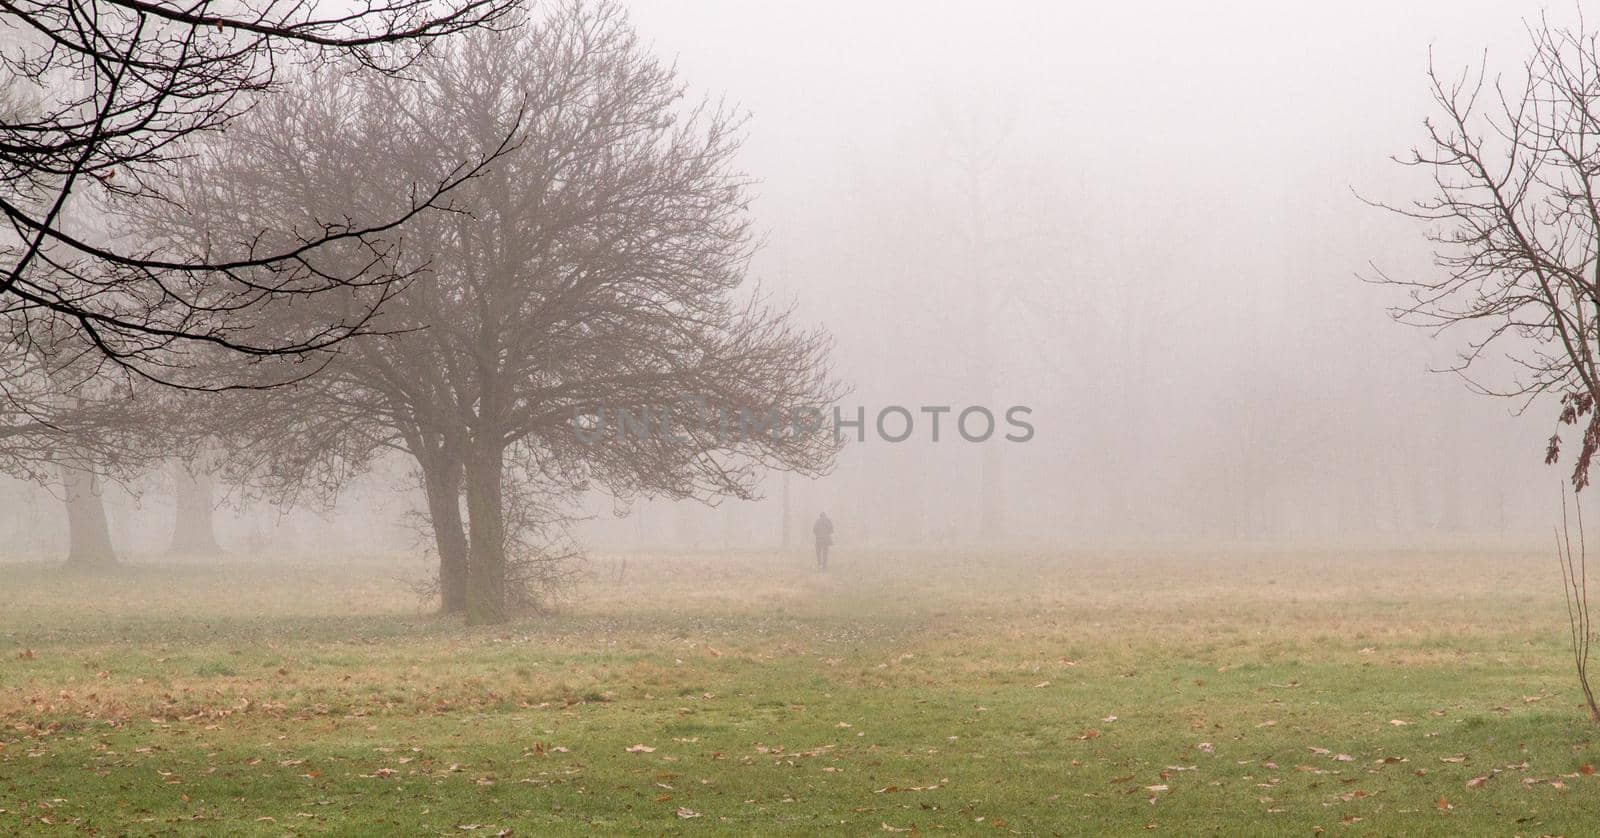 Wide-shot of a man walking in a park on a foggy day